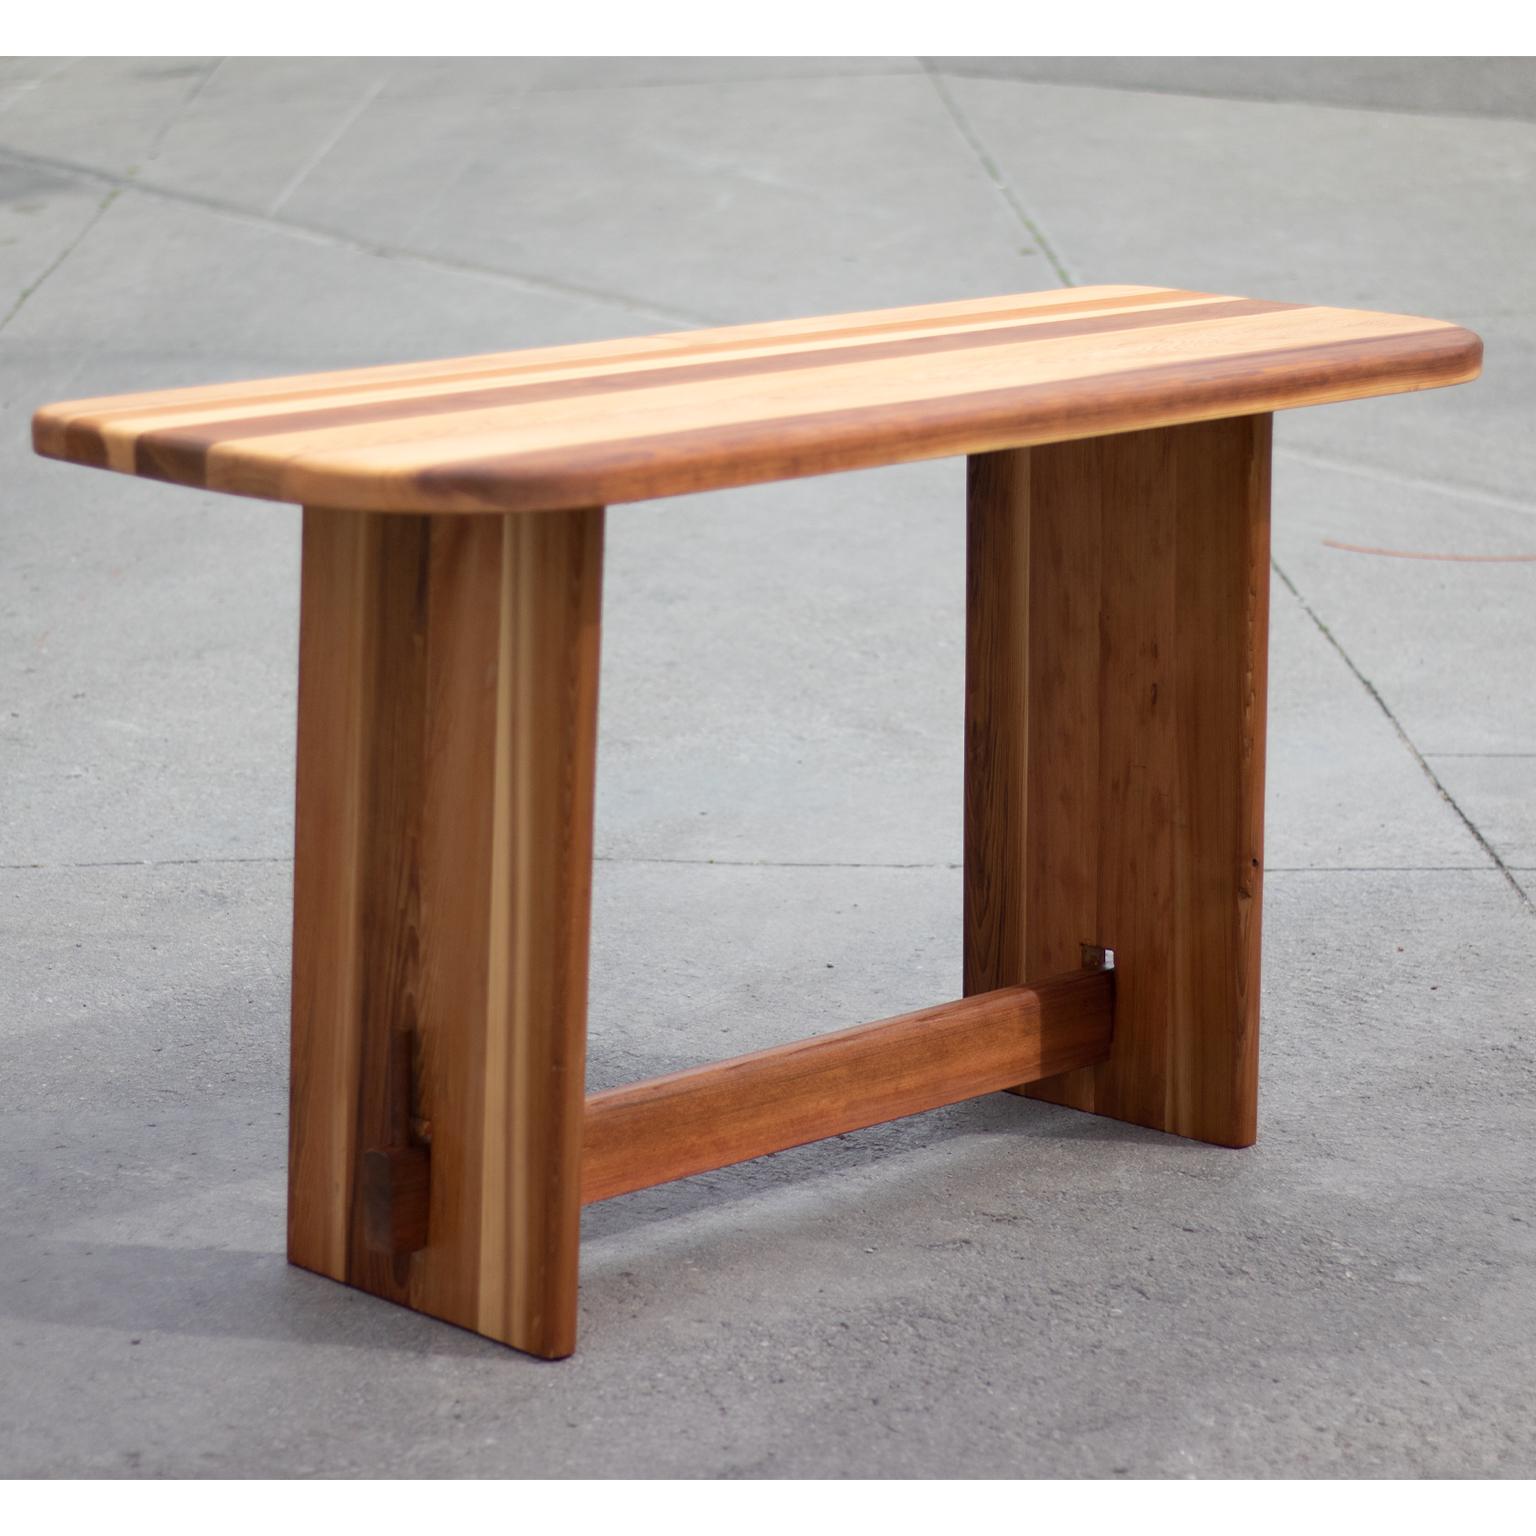 Anglo-Japanese Imperial Cedar Outdoor Dining Table For Sale